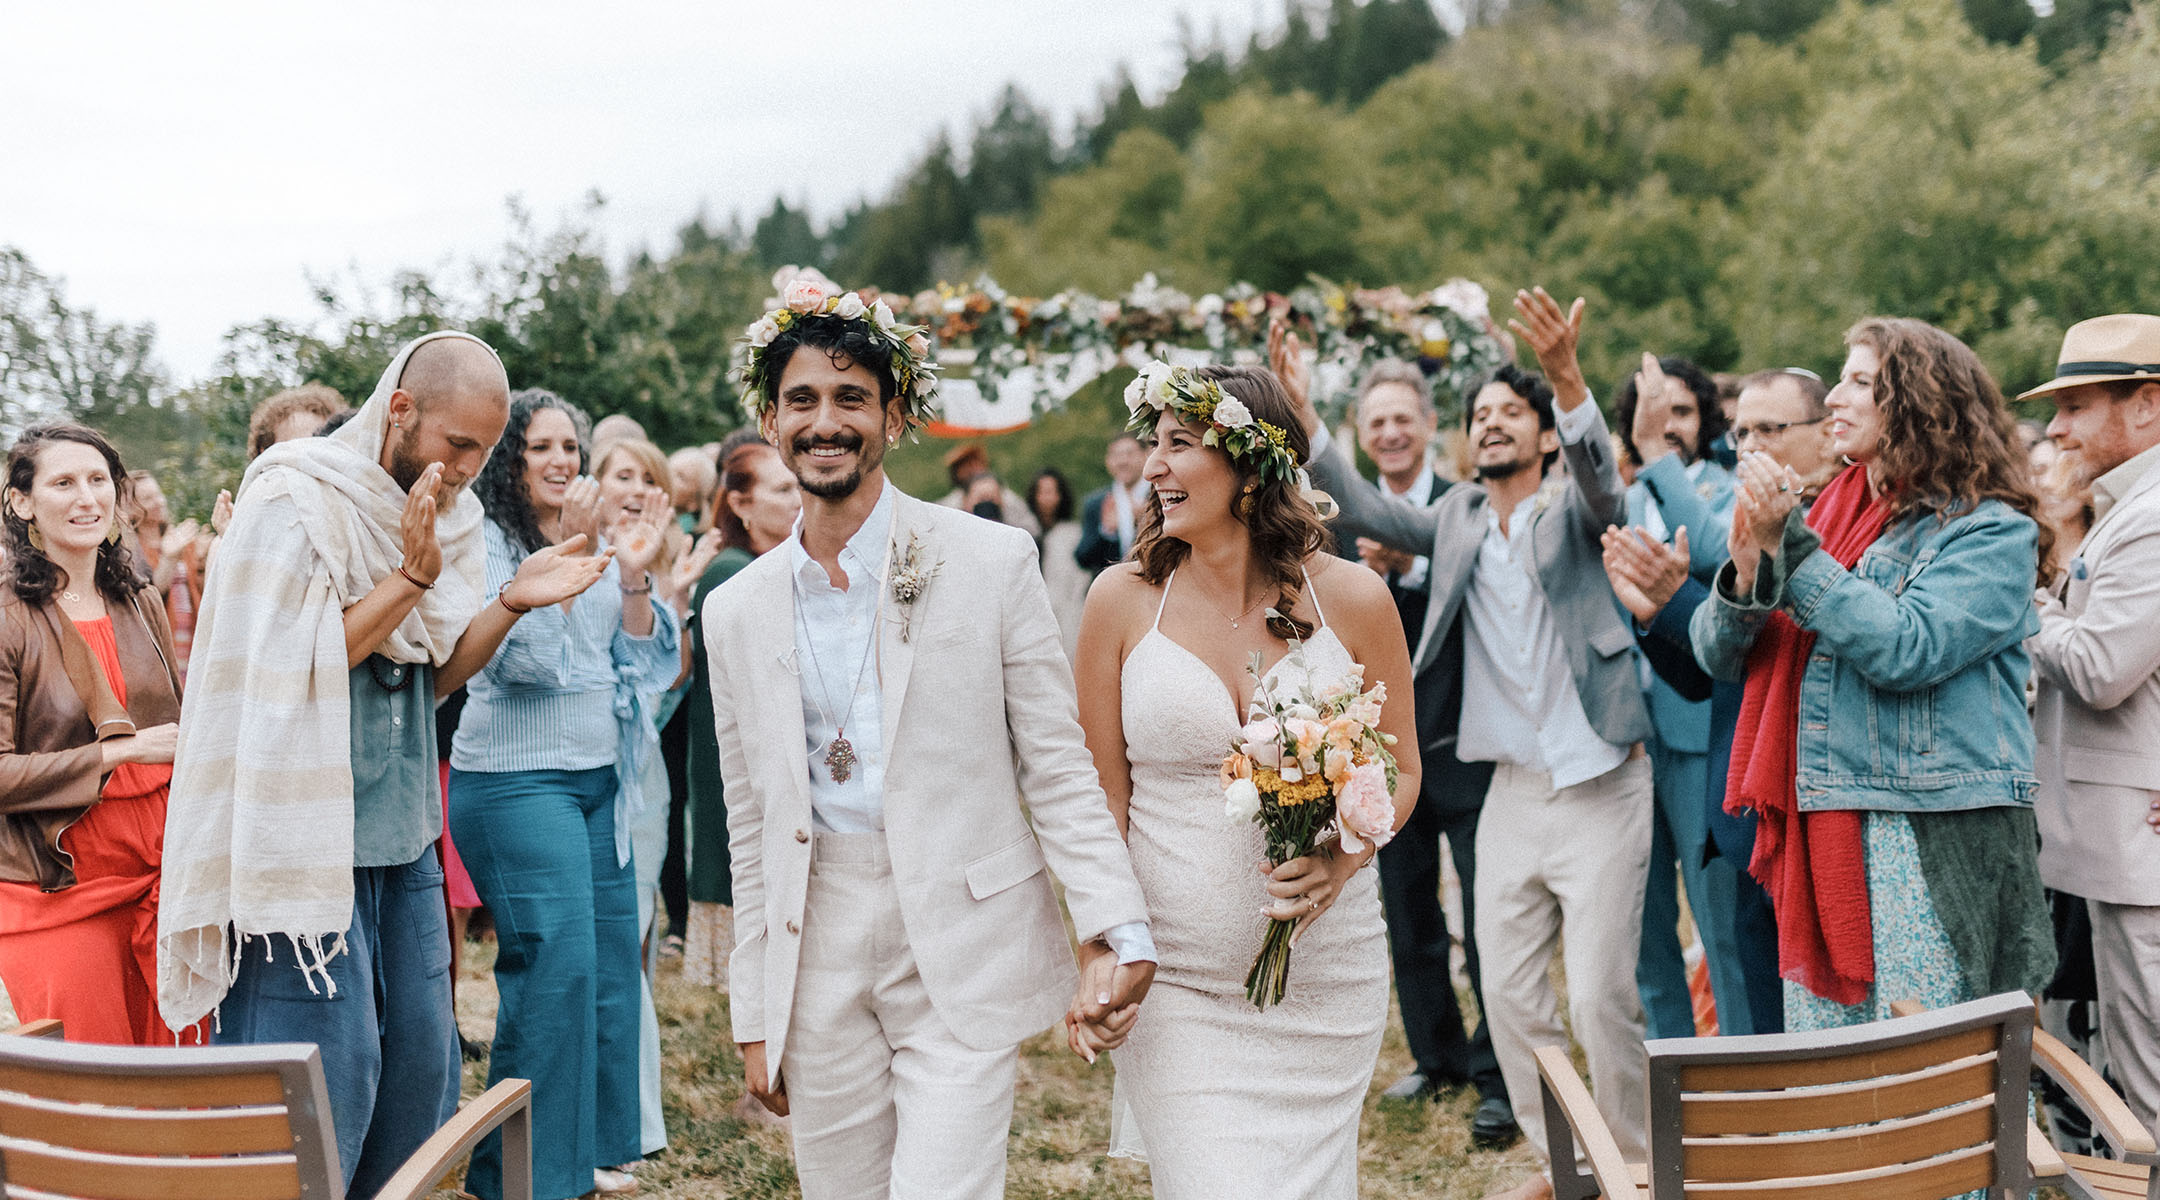 Their wilderness-inspired Jewish wedding featured an animal-skin ketubah and ‘first fruits’ altar